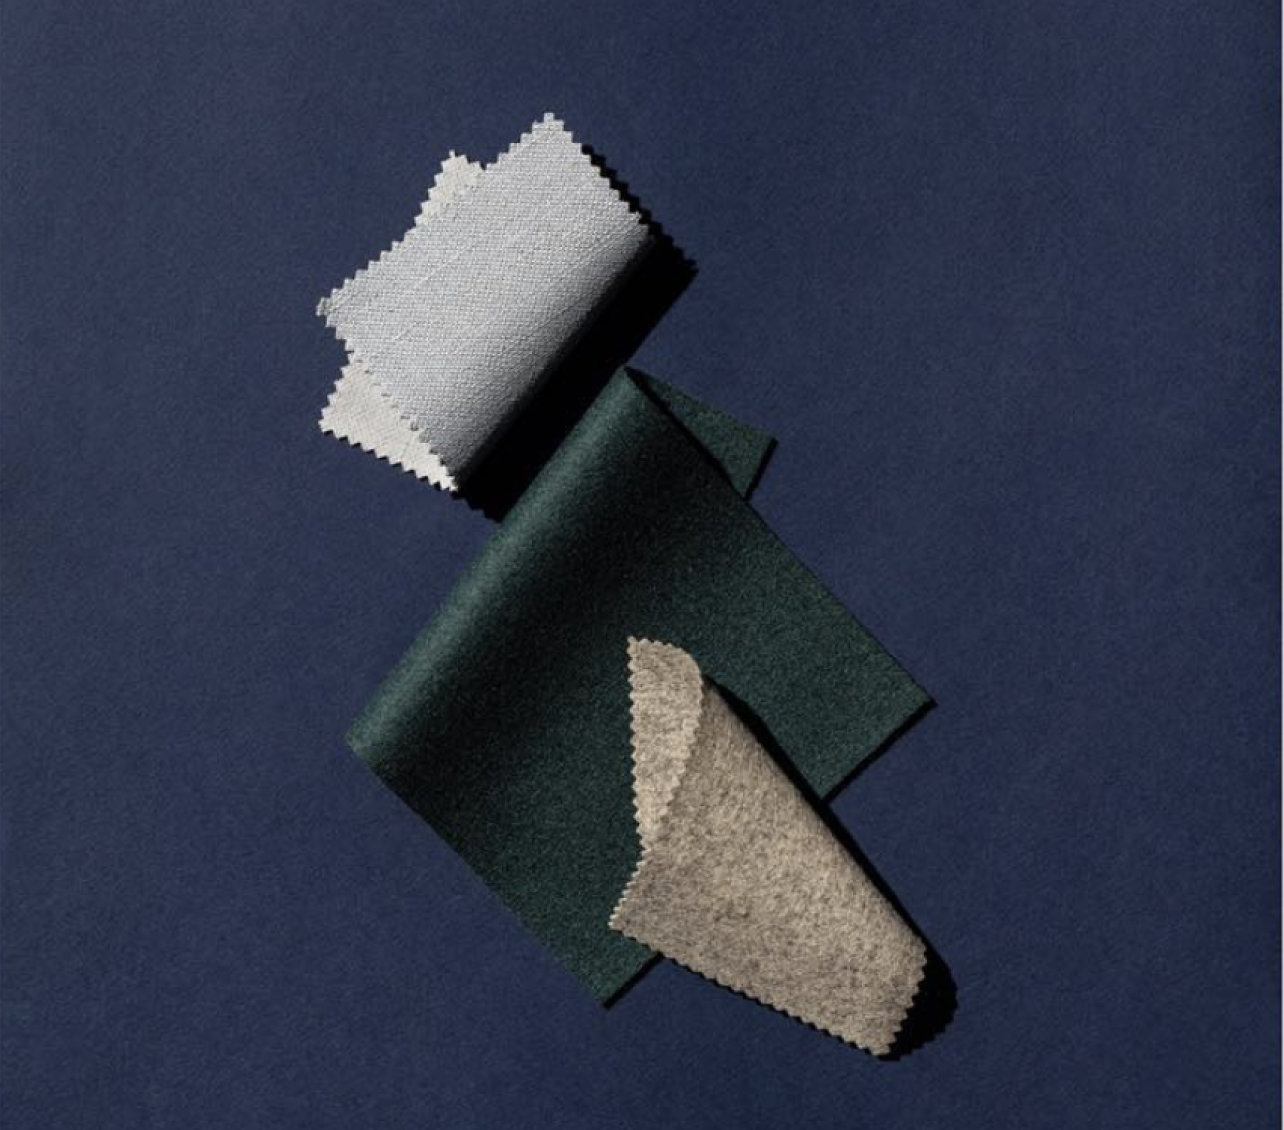 Gray fabric, green fabric, and tan fabric folded on a dark blue background.